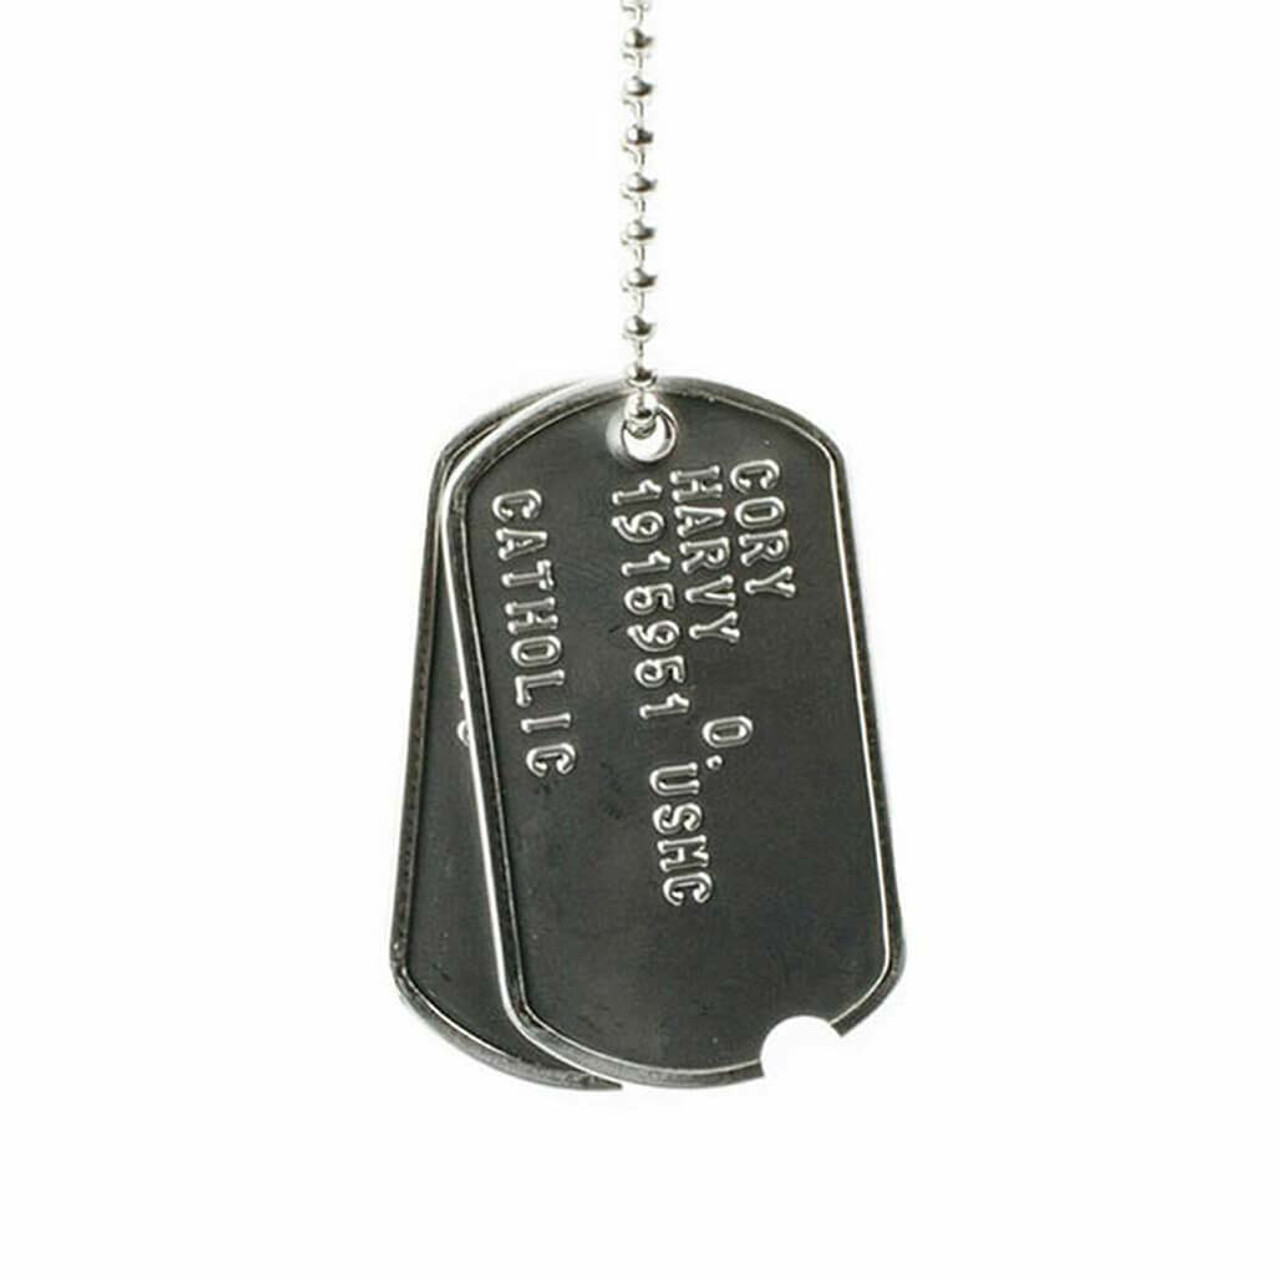 Personalized Military Dog Tag Set (Set Includes 2 Tags, 2 Chains, 2 Silencers & A Bonus P-38) - VetFriends